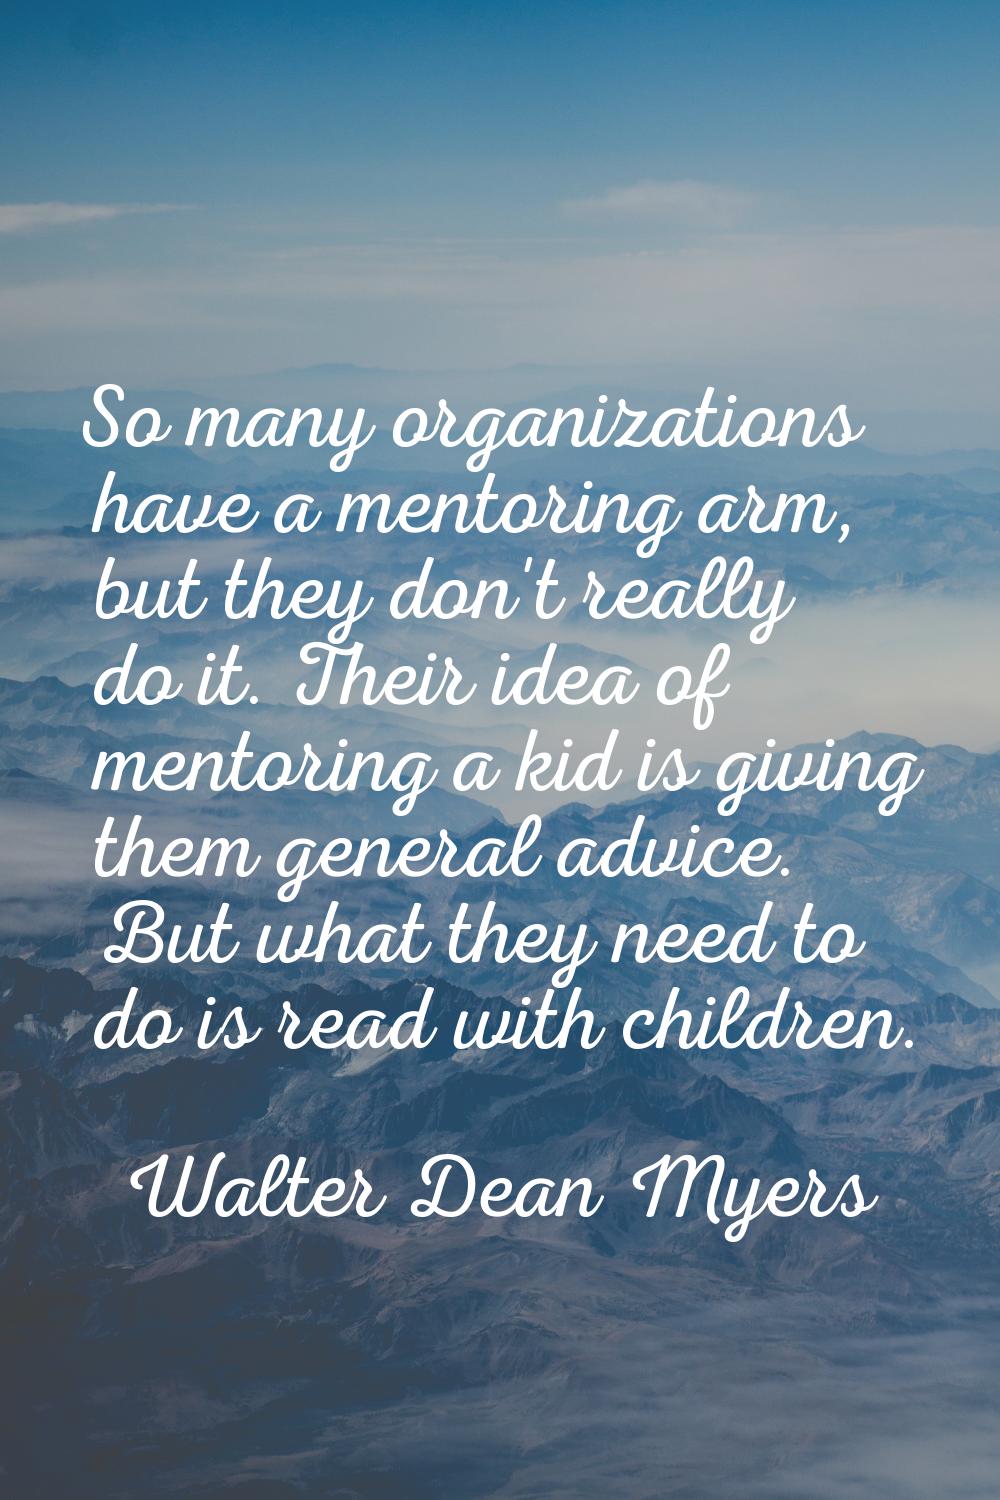 So many organizations have a mentoring arm, but they don't really do it. Their idea of mentoring a 